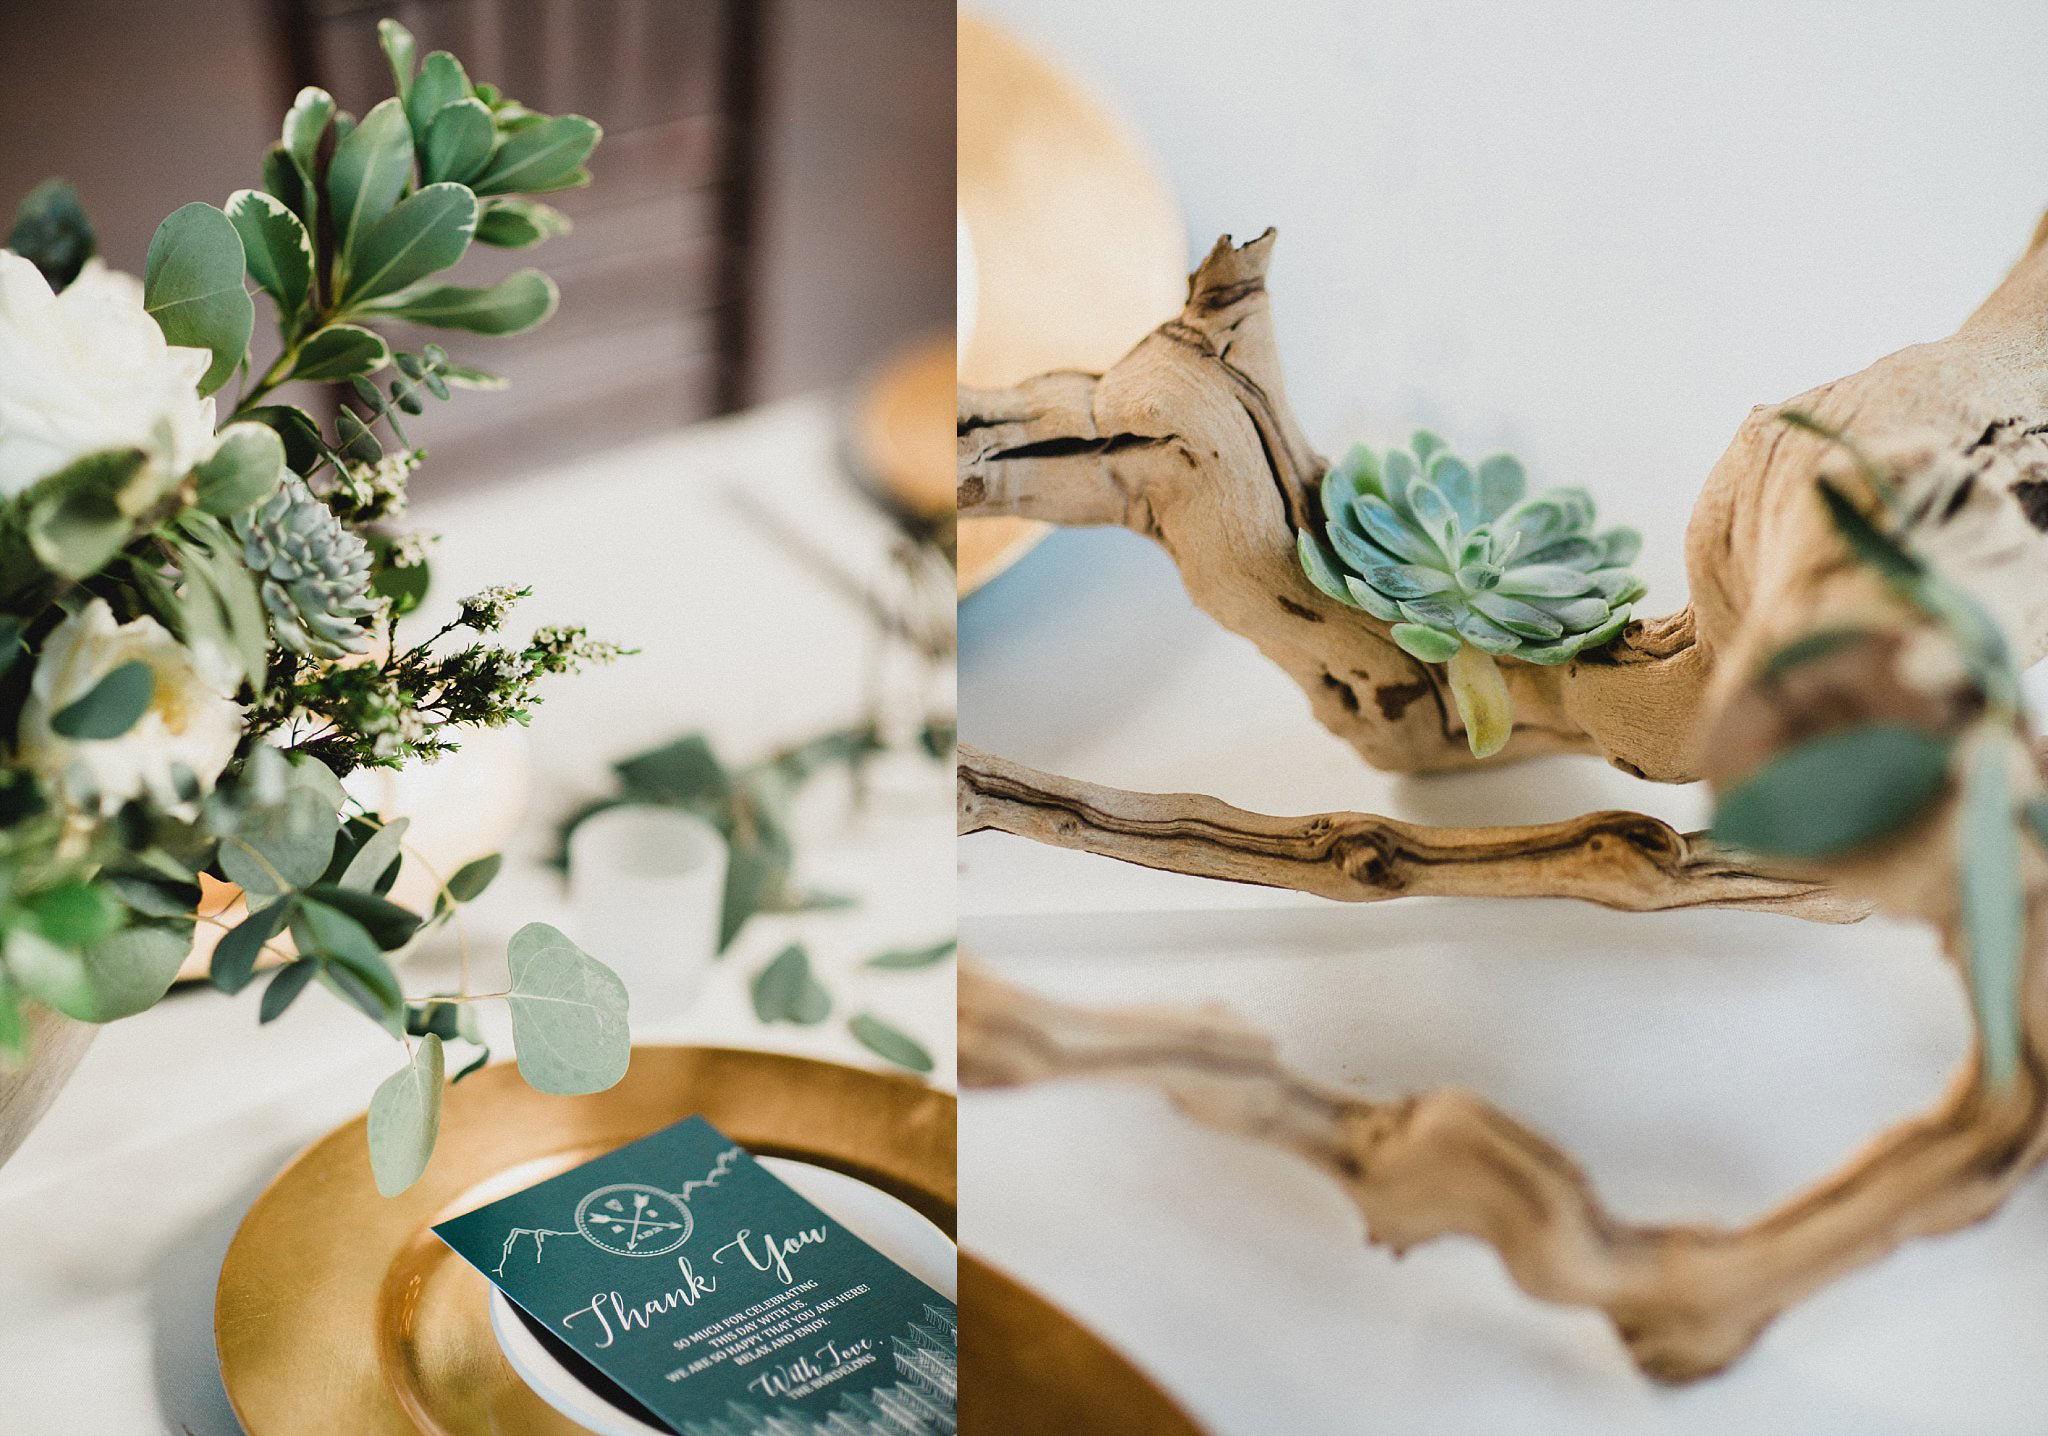 Driftwood and succulents on tables for organic wedding table decor